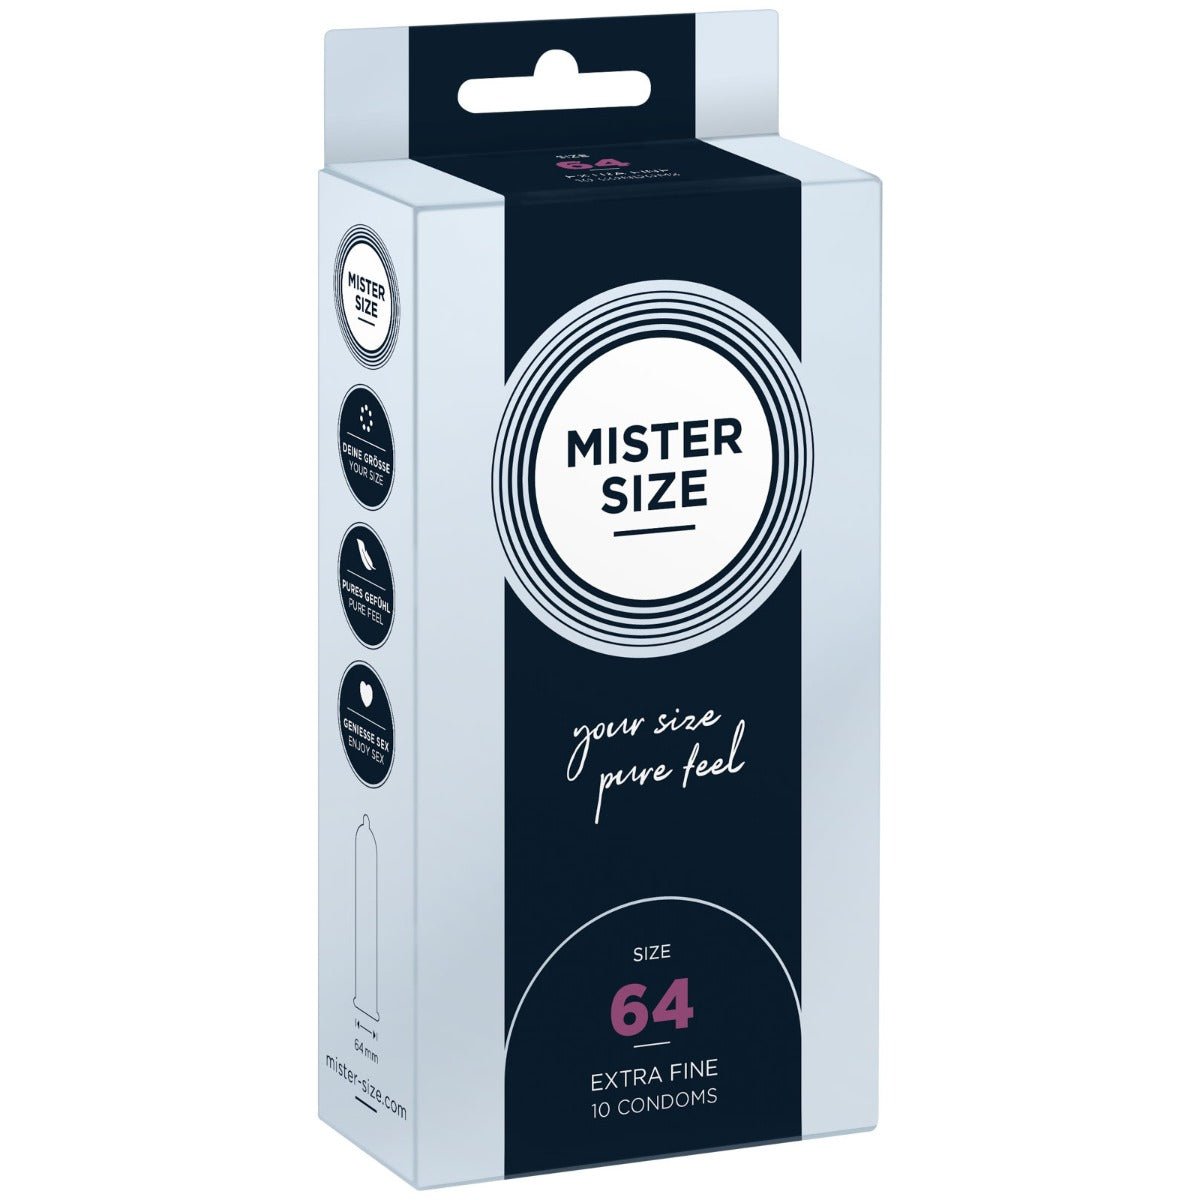 Condoms MISTER SIZE - pure feel Condoms - Size 64 mm (10 pack)   